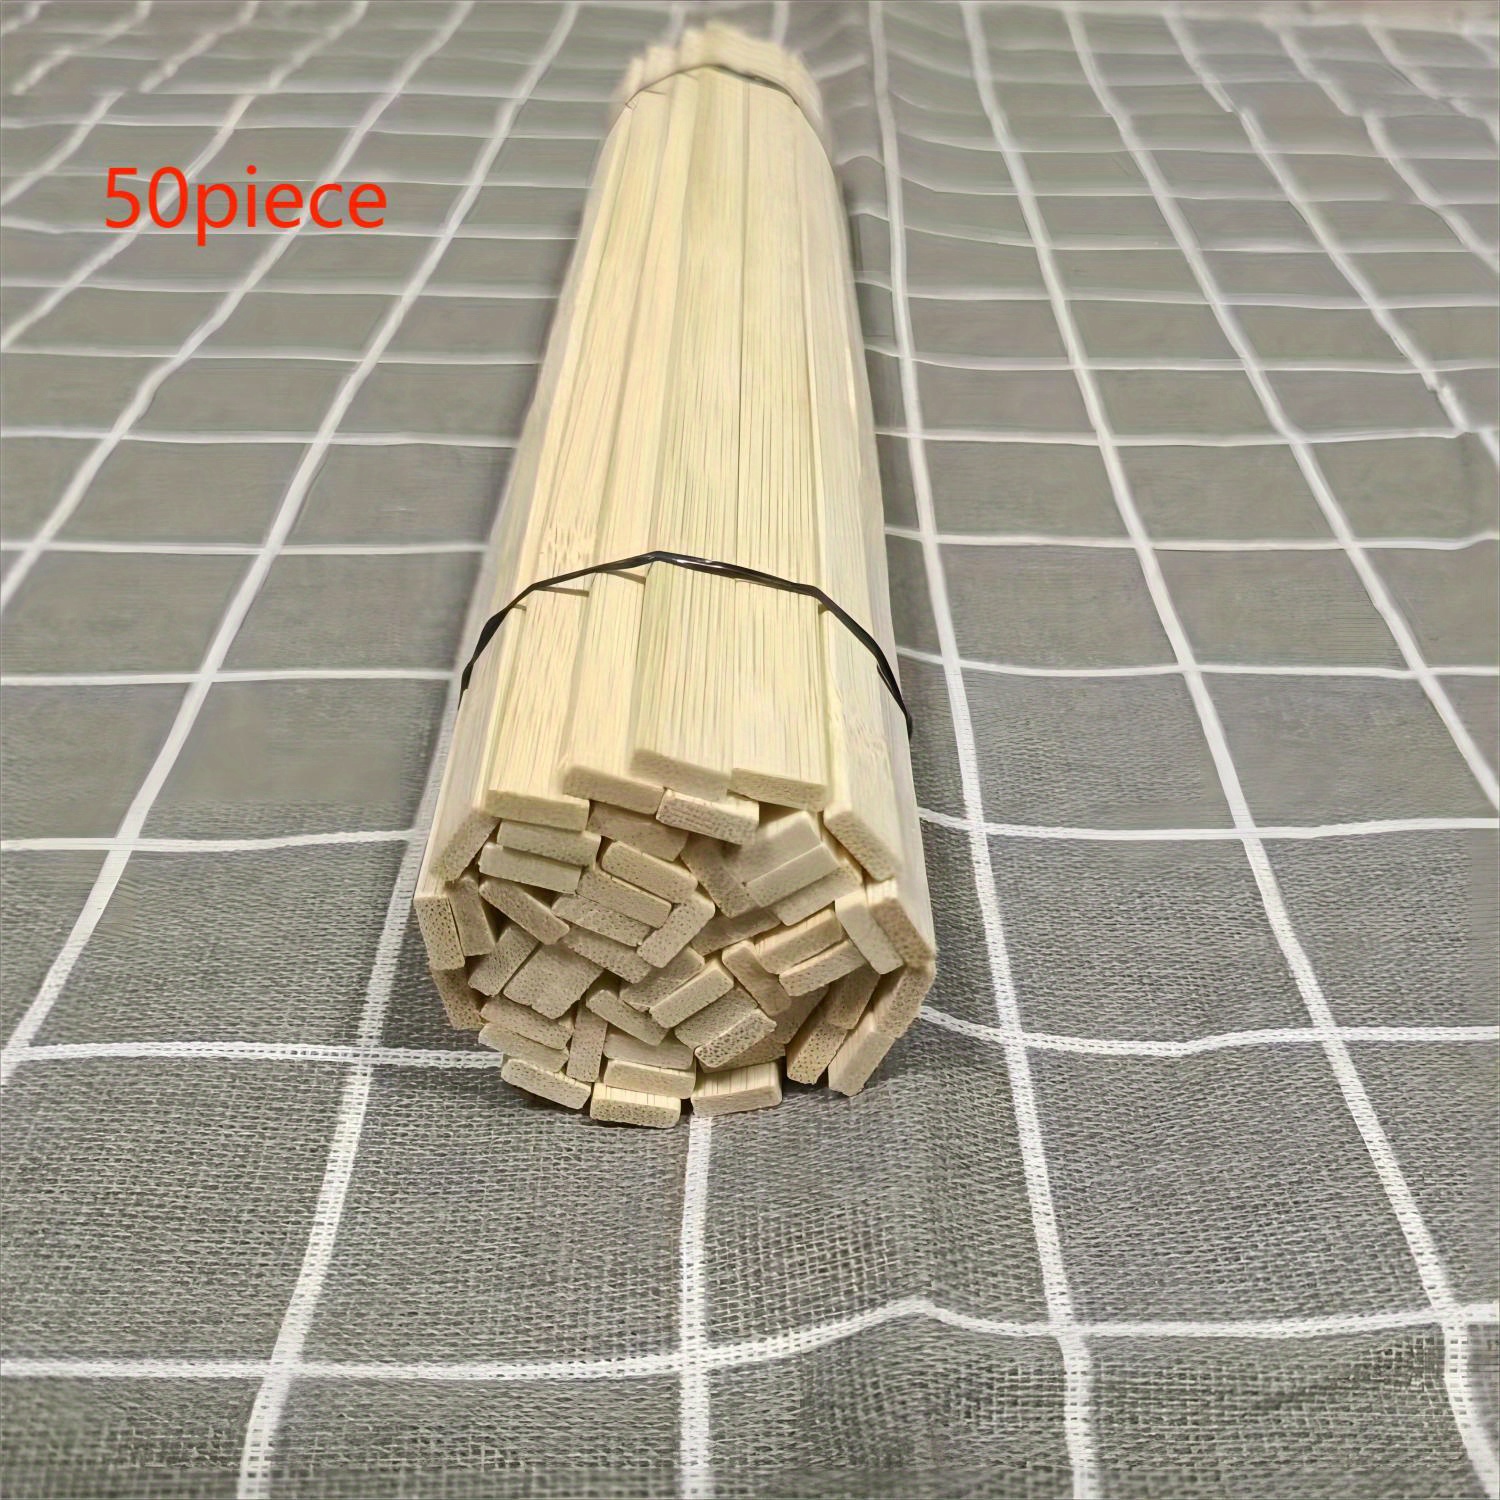 60Pcs Balsa Wood Sticks 12 inch Long Unfinished Wooden Strips Square Dowels  Strips for DIY Molding Crafts Projects Making 